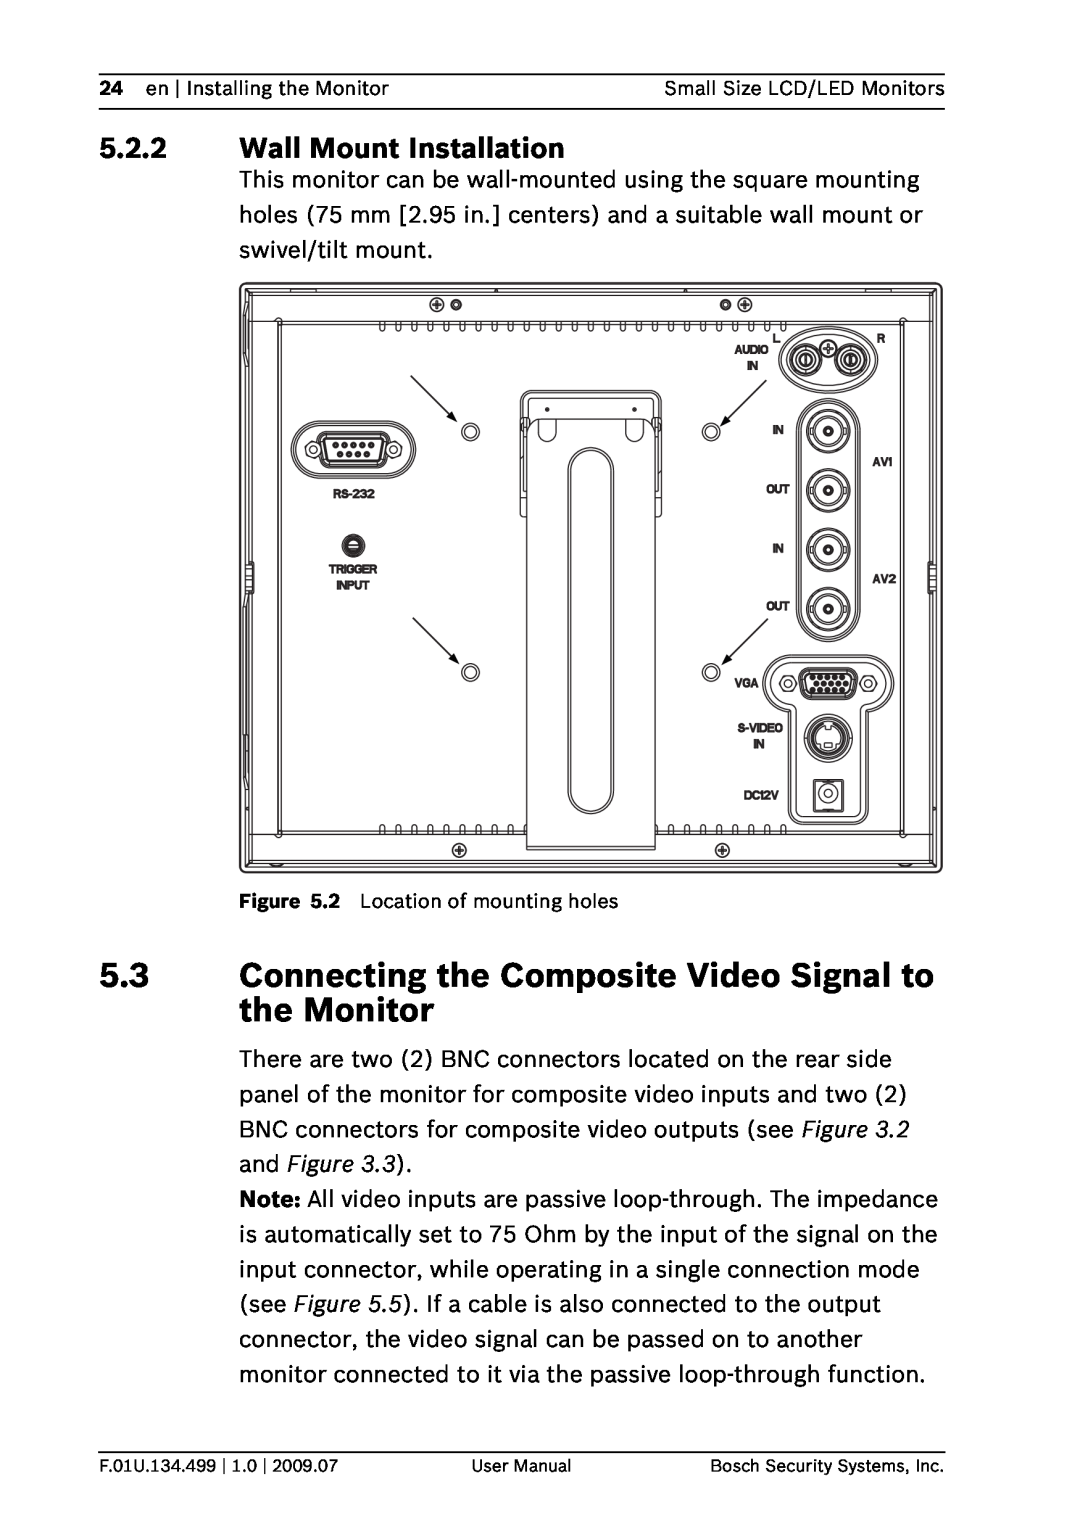 Bosch Appliances UML-102-90, UML-100-90 Connecting the Composite Video Signal to the Monitor, Wall Mount Installation 